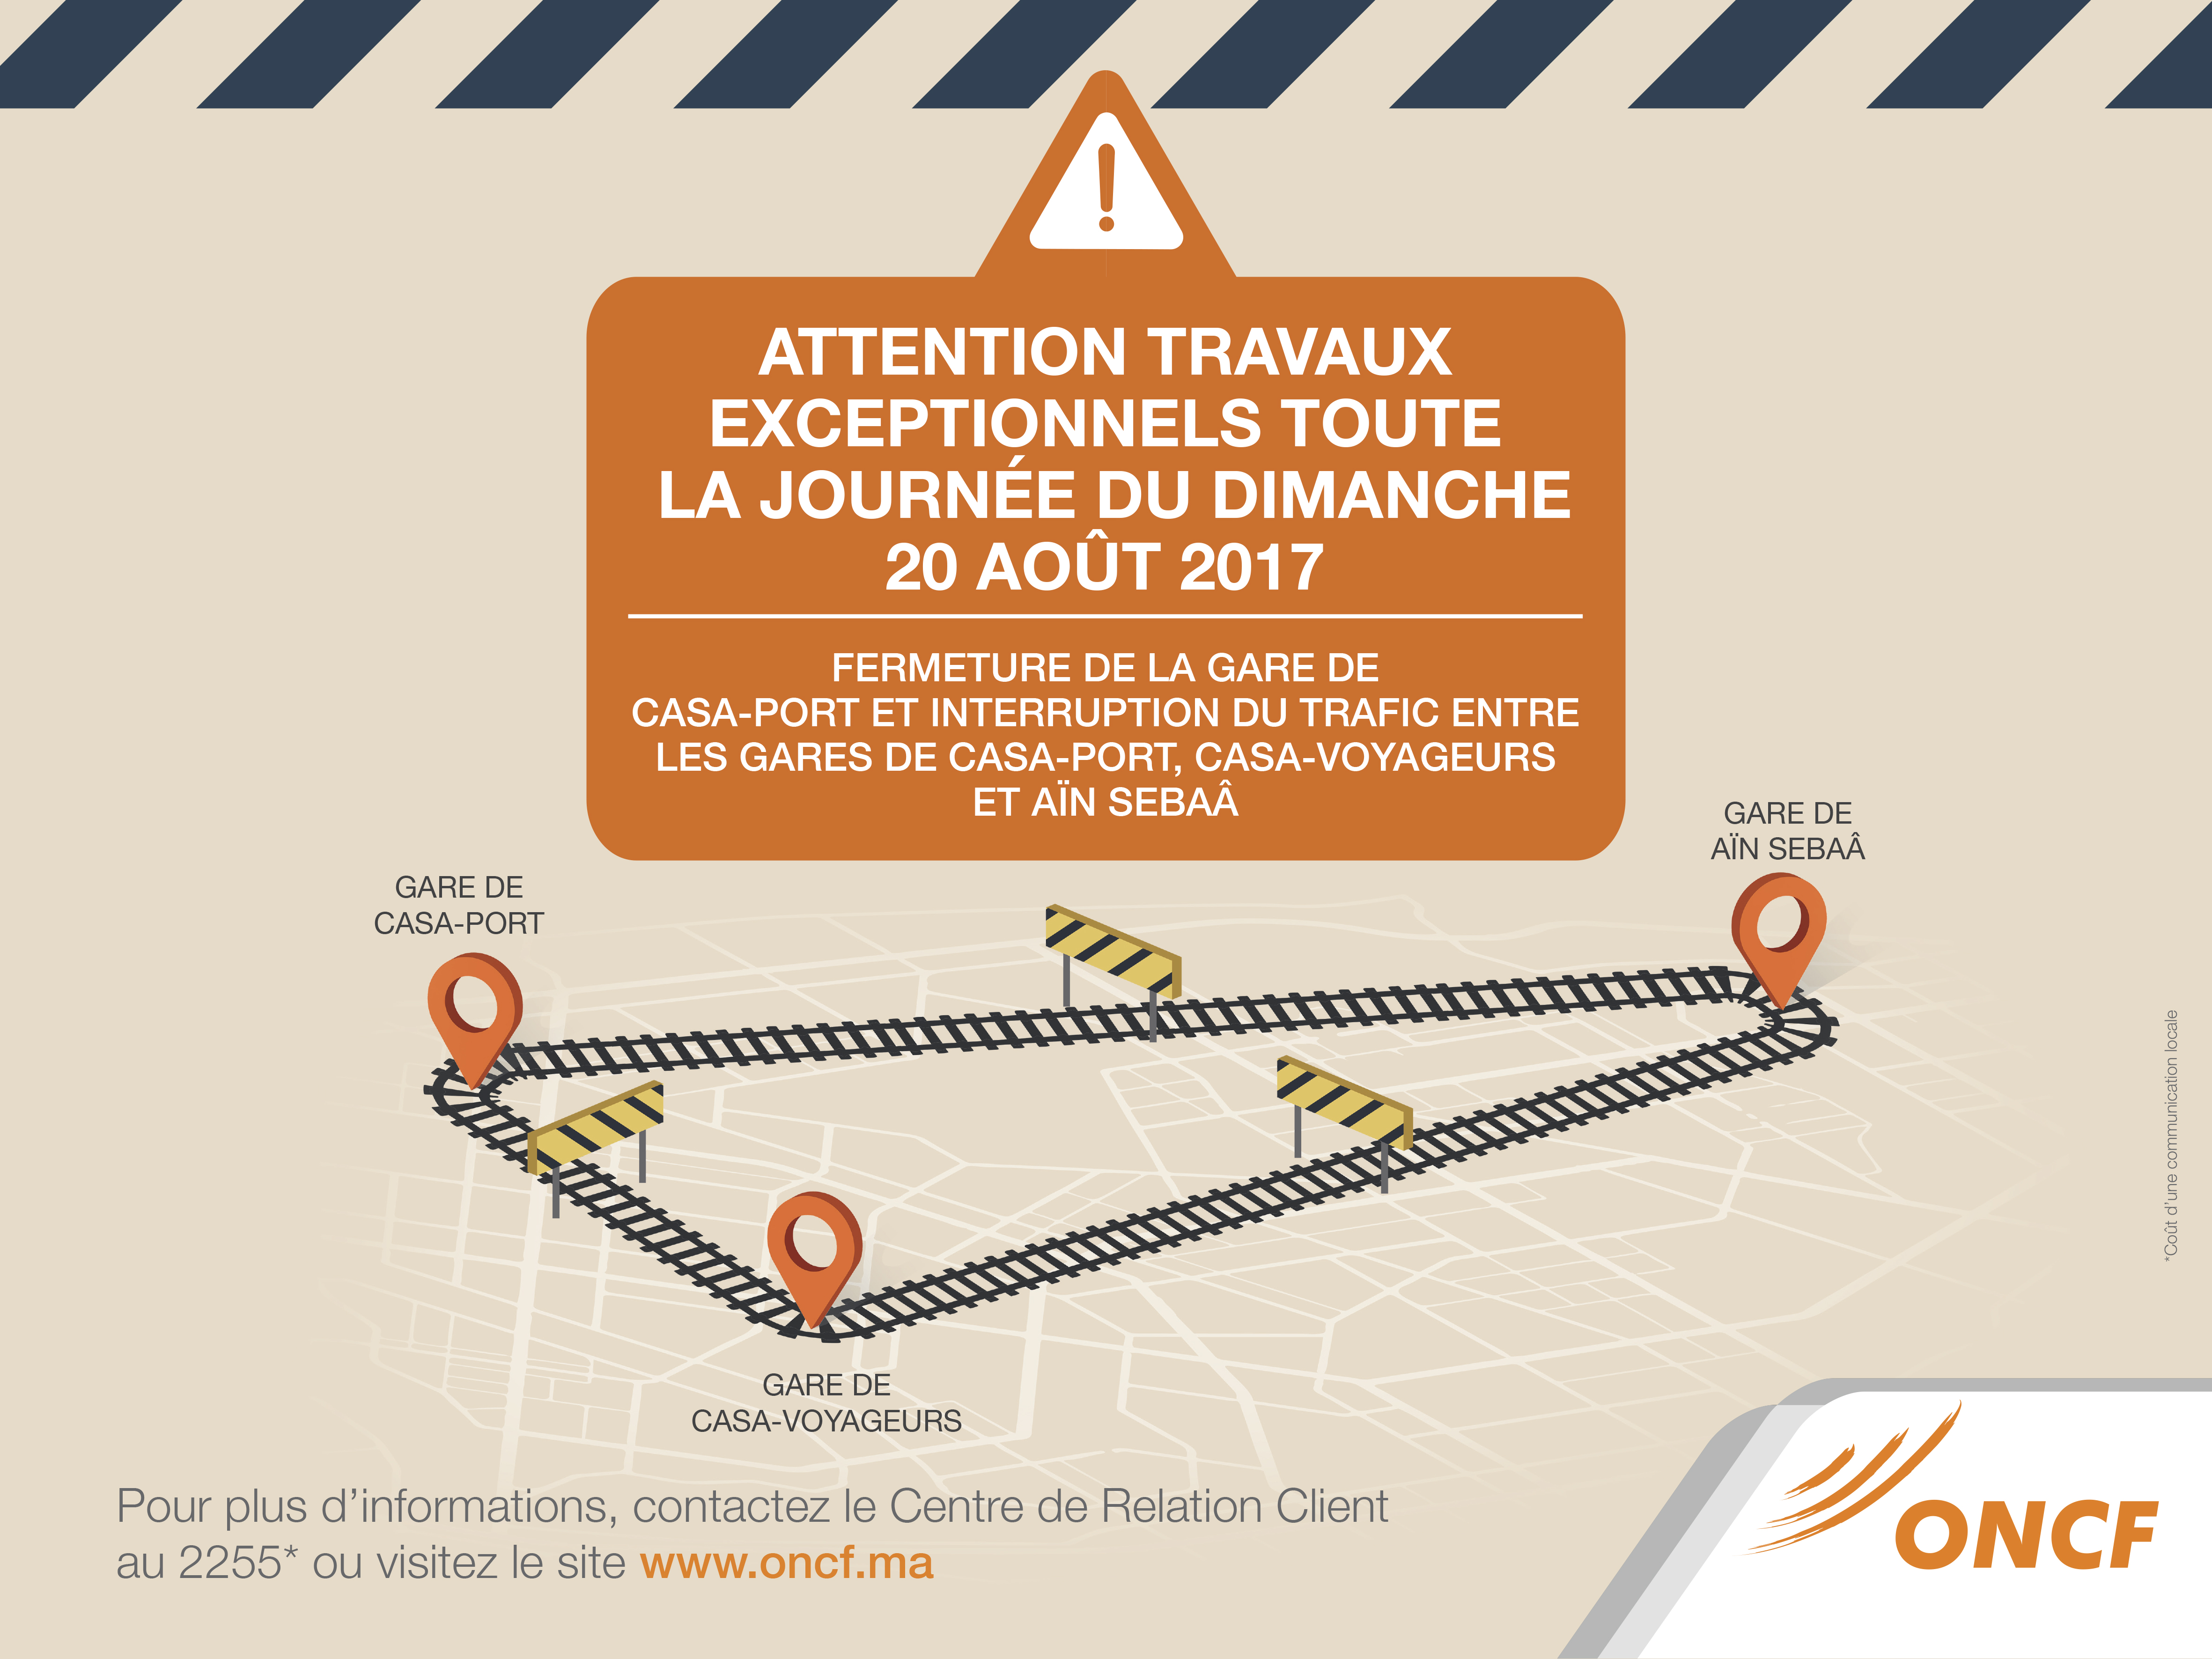 Closure At The Railway Carrefour Of Casablanca For General Works